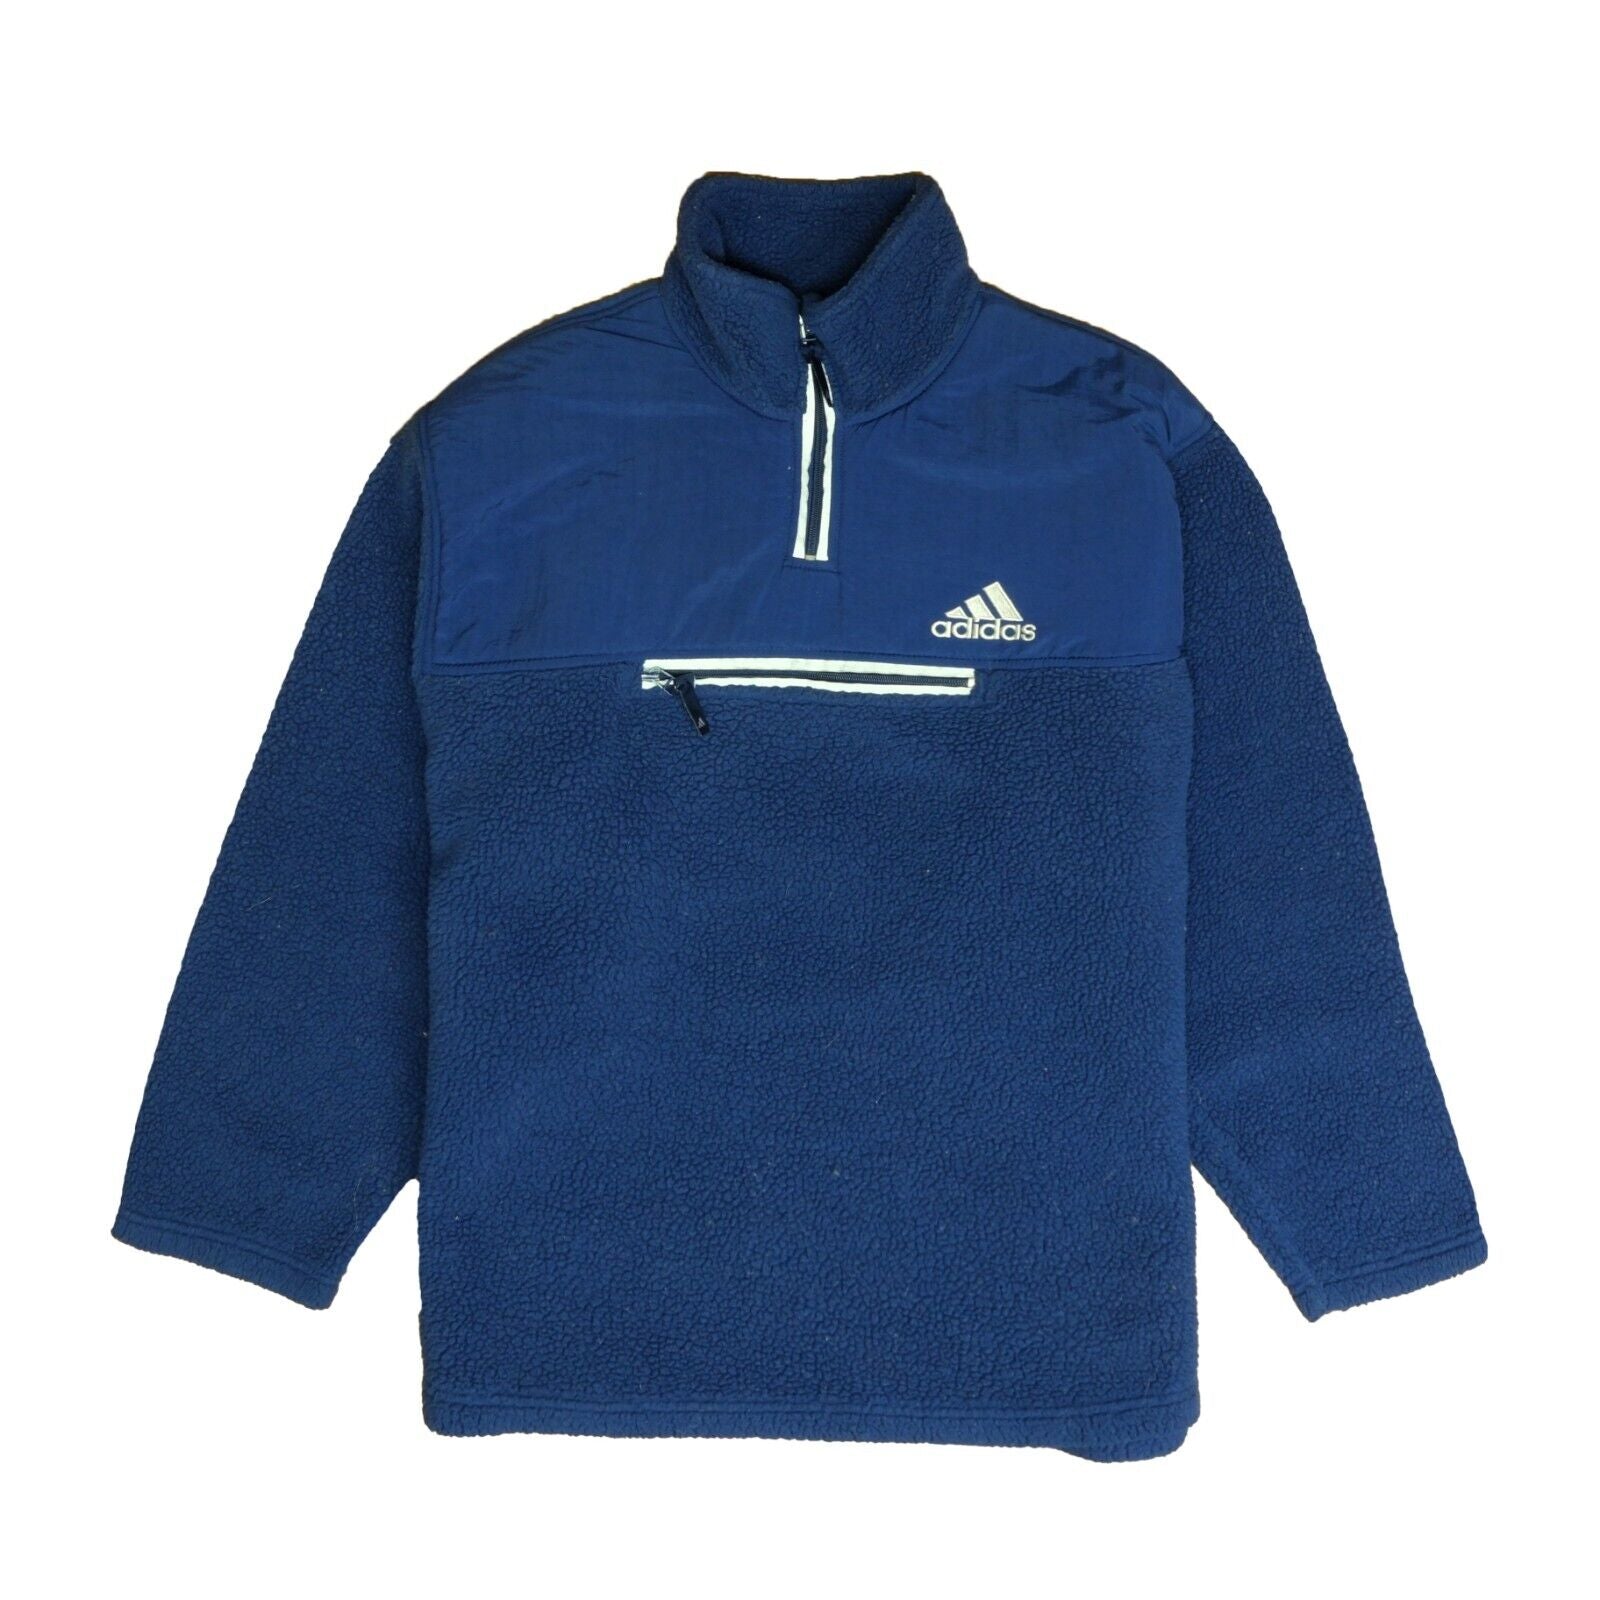 Vintage Adidas Fleece Jacket Size Large Blue 1/4 Zip Pullover Embroidered  90s